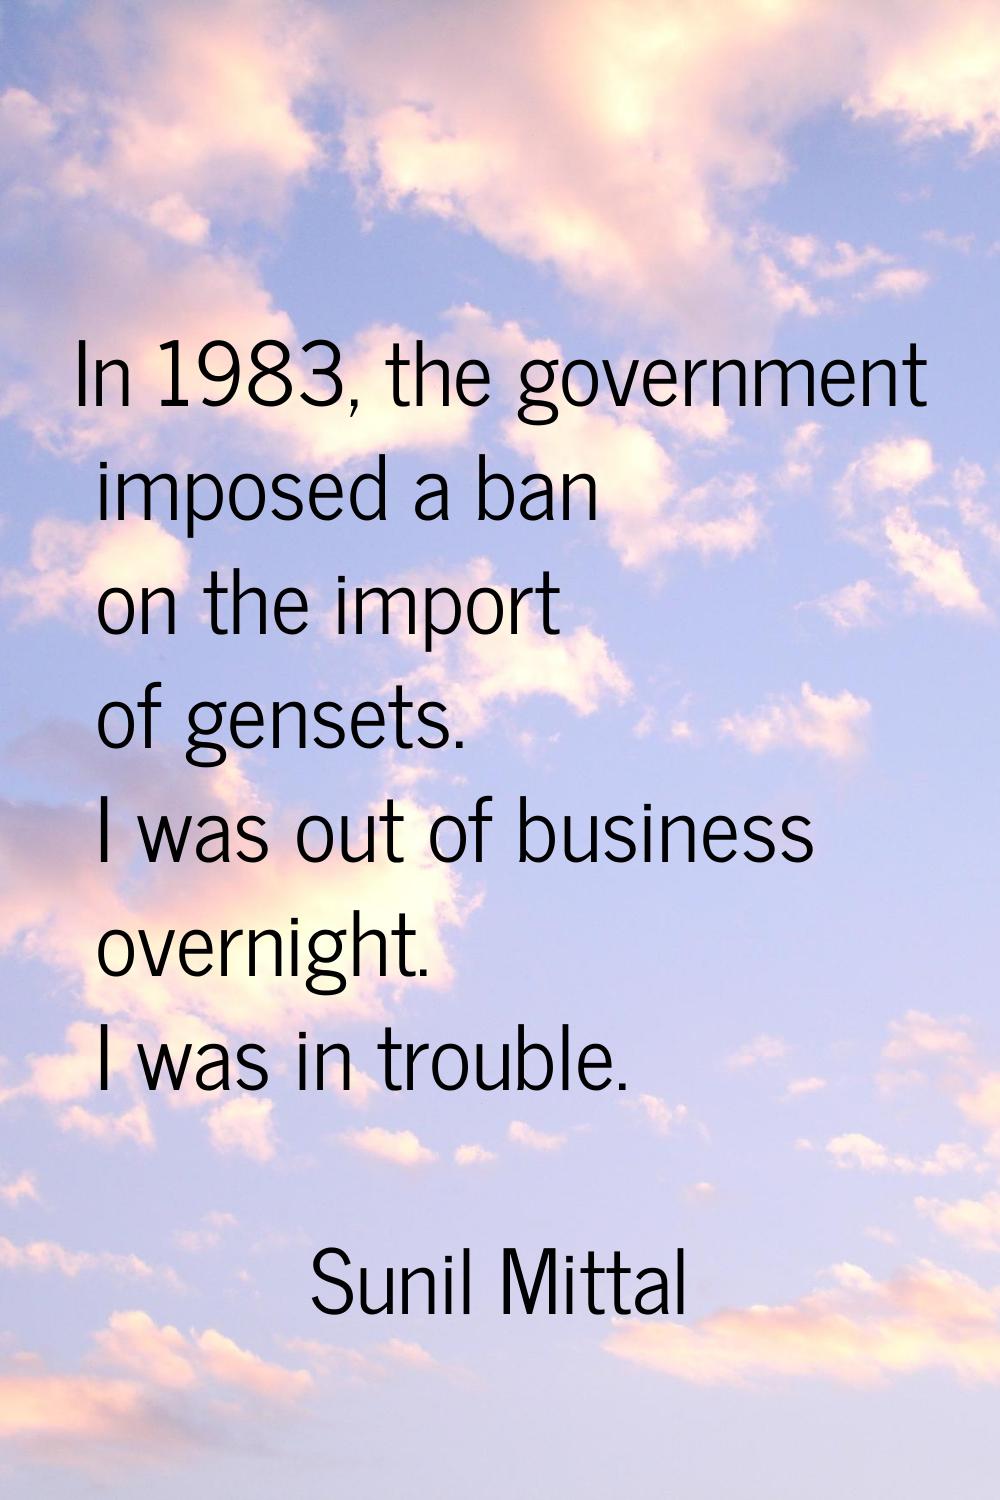 In 1983, the government imposed a ban on the import of gensets. I was out of business overnight. I 